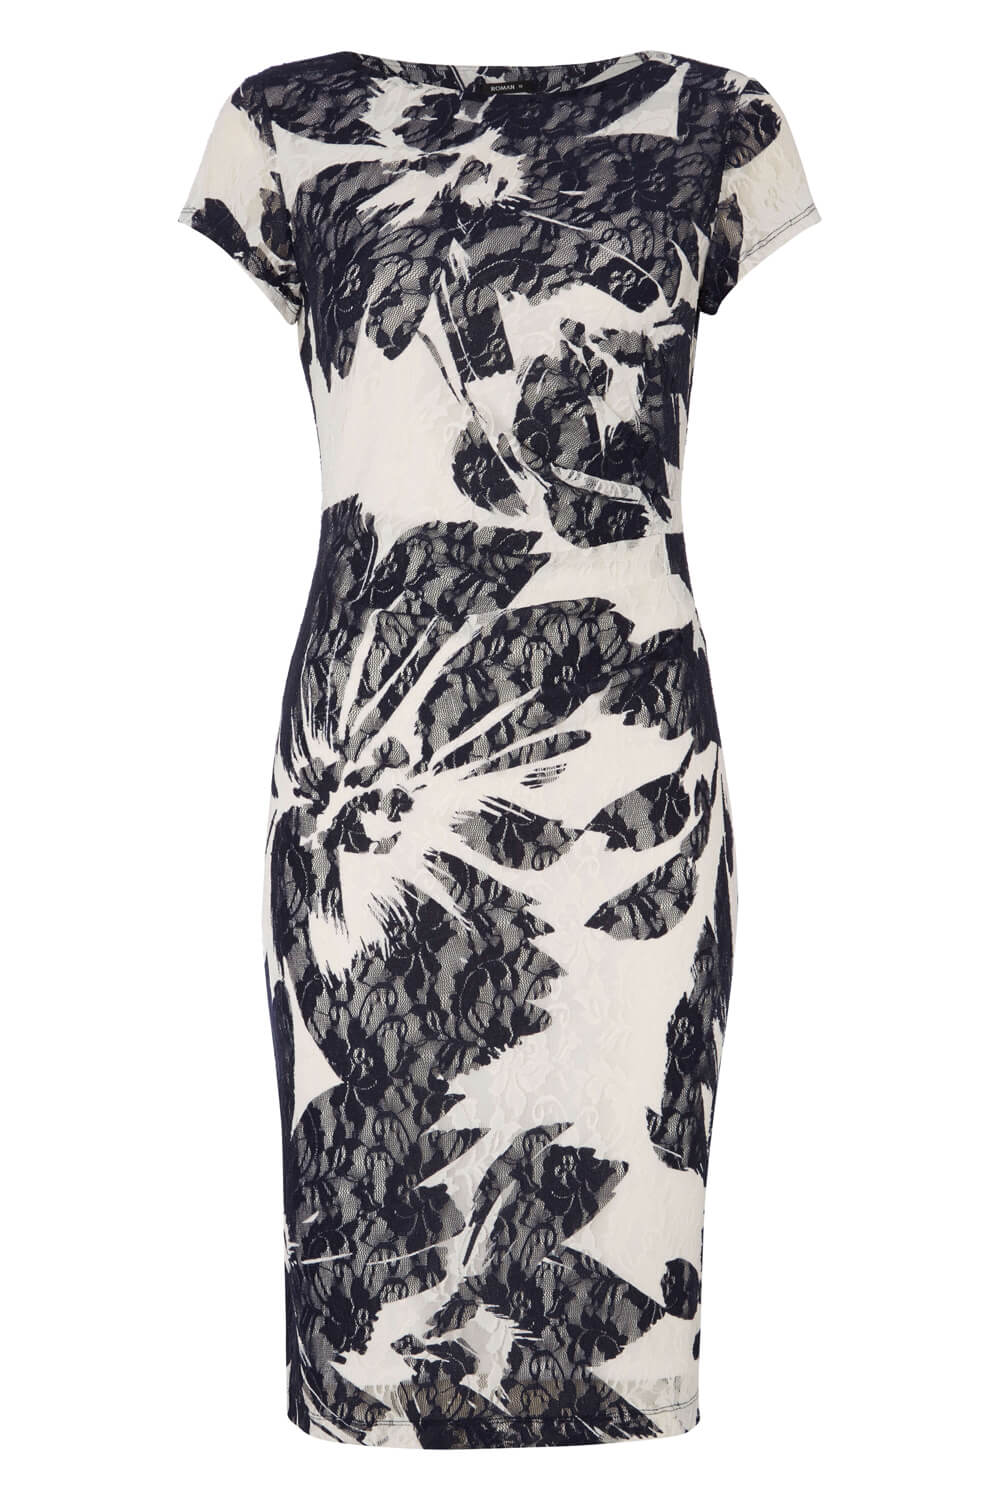  Floral Print Lace Ruched Dress, Image 4 of 4